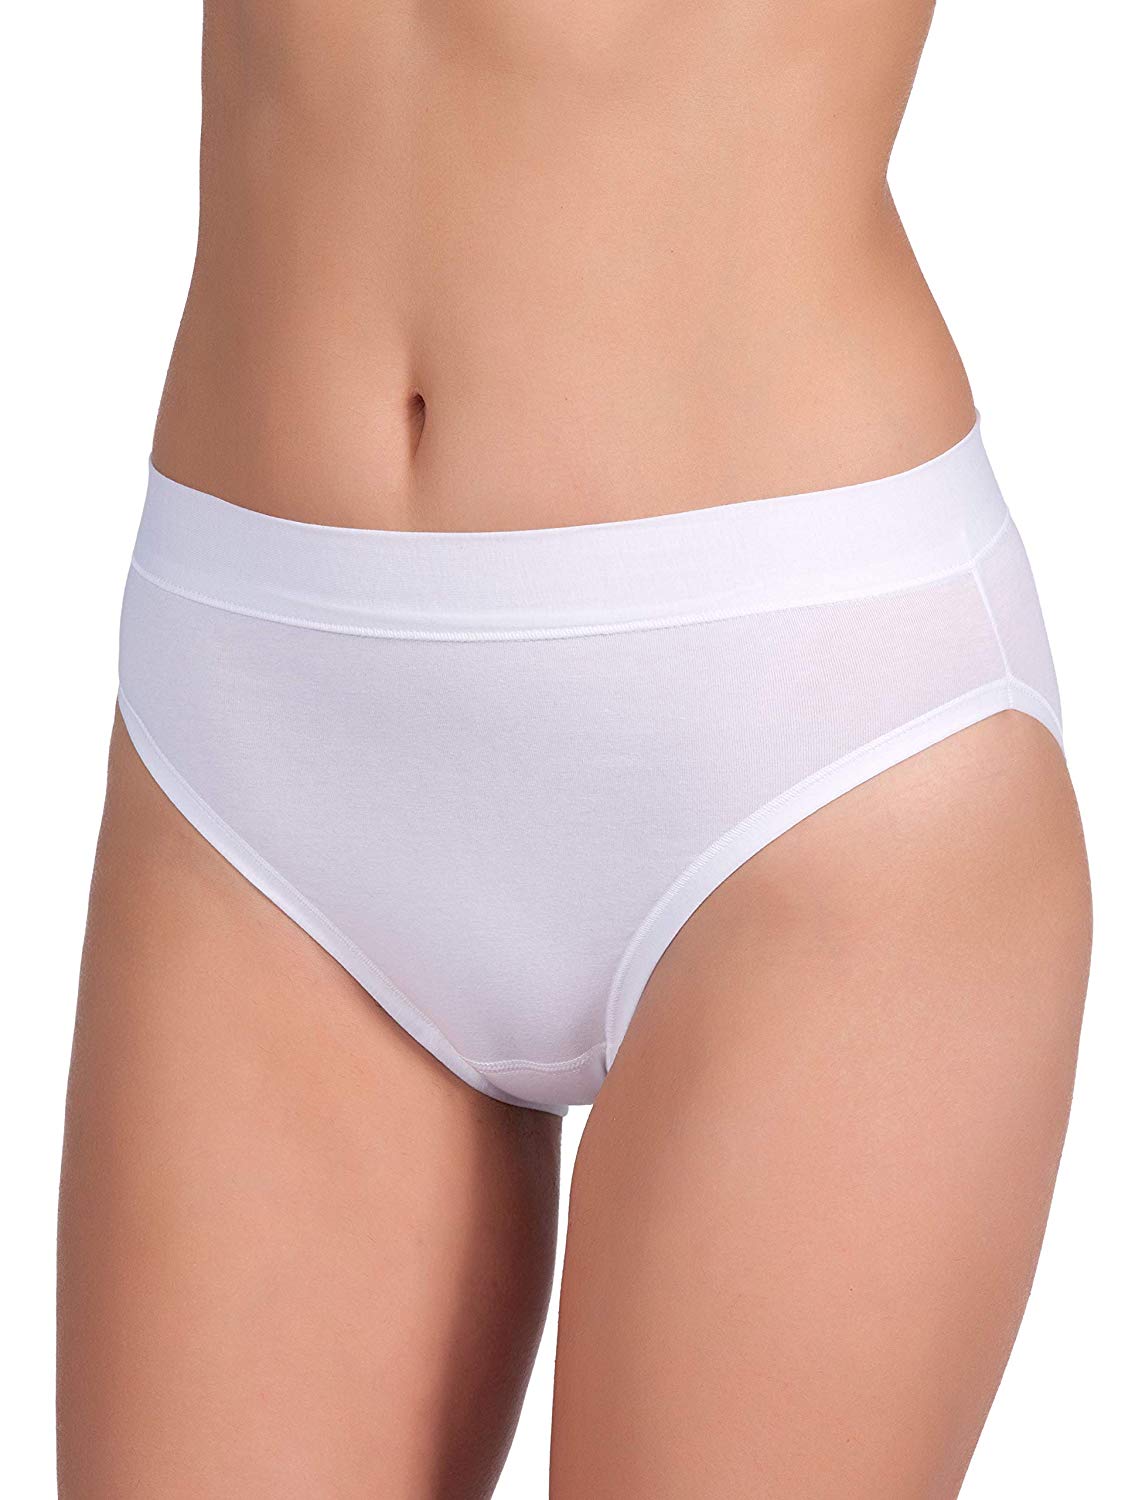 Women's COTTON PANTIES. Made in ITALY. Everyday Briefs. Classic  Full-coverage Fit. Perfect Basics. Low-rise. Basic Colors.comfy & Soft. 